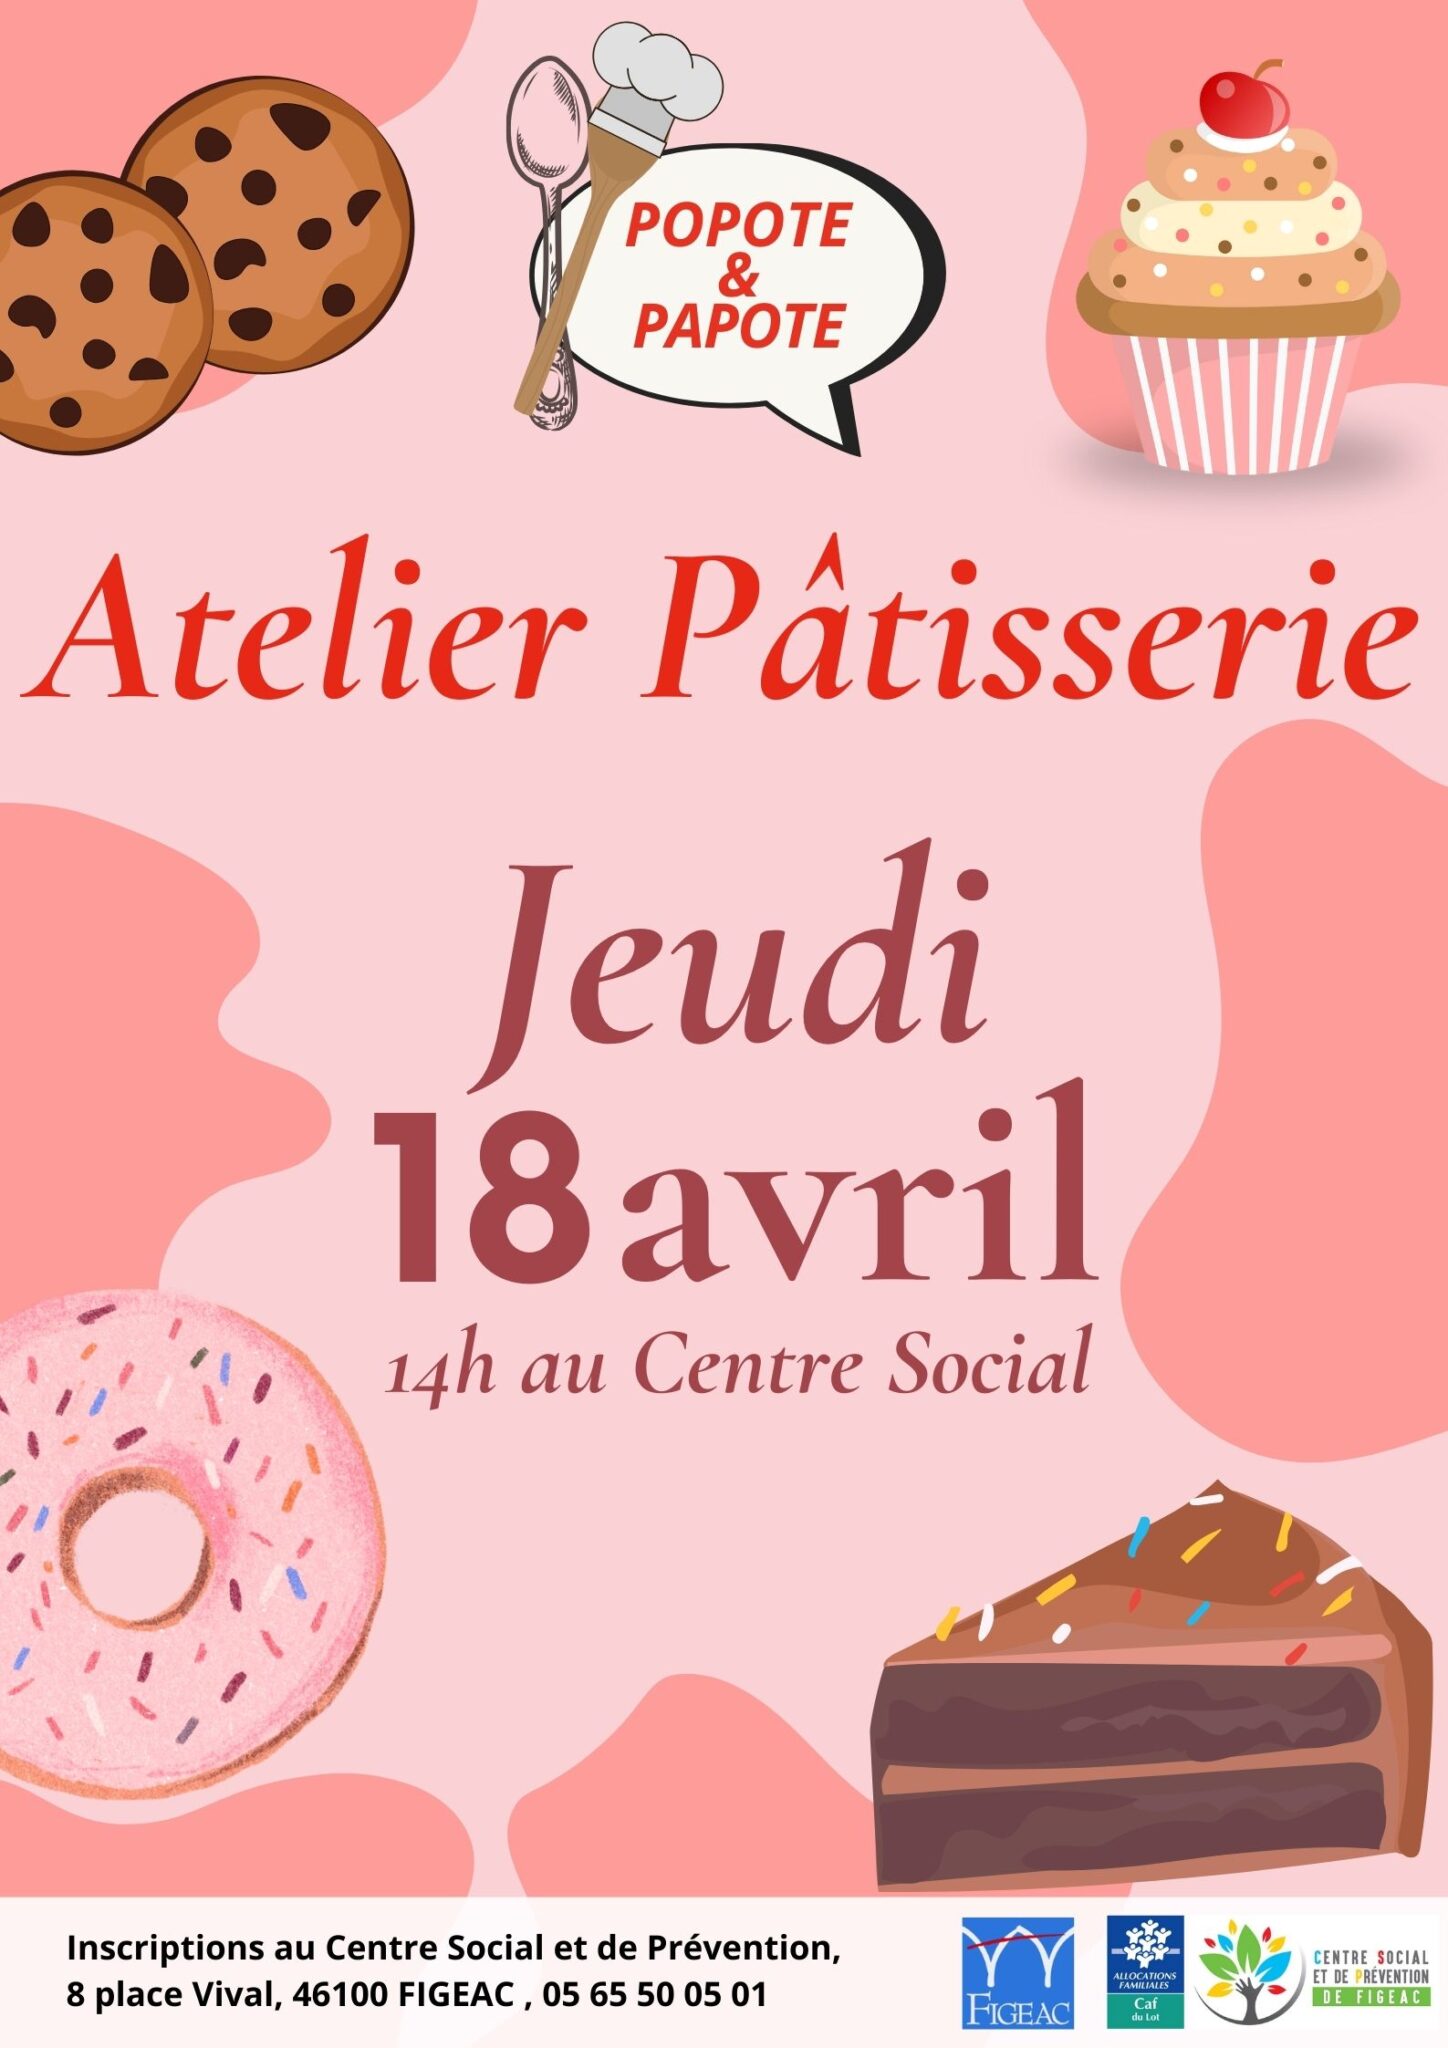 2024-Popote-Papote-Atlier-Patisserie-Ville-Figeac